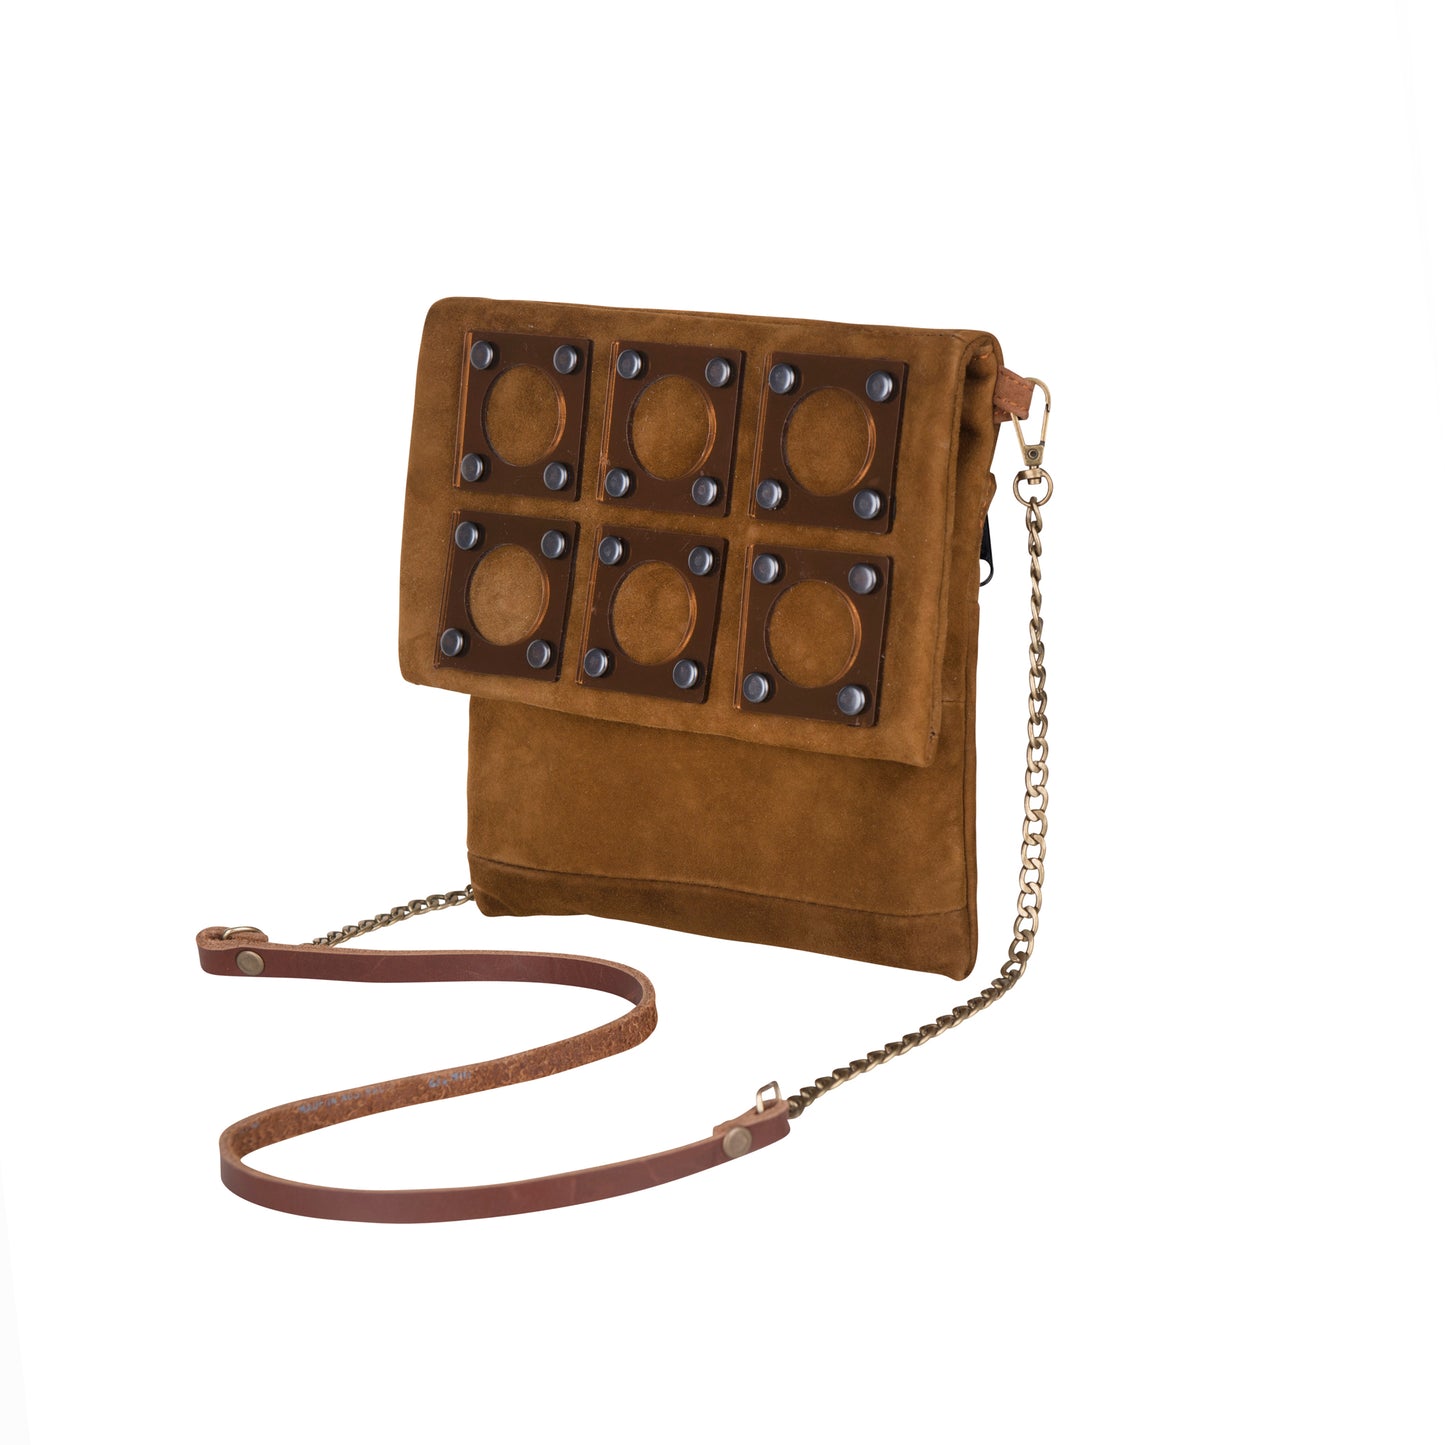 METANoIA tan recycled leather small handbag with square and hollowed circle bronze acrylic forms fashioned into a repeative fashion. Featured on sideview.